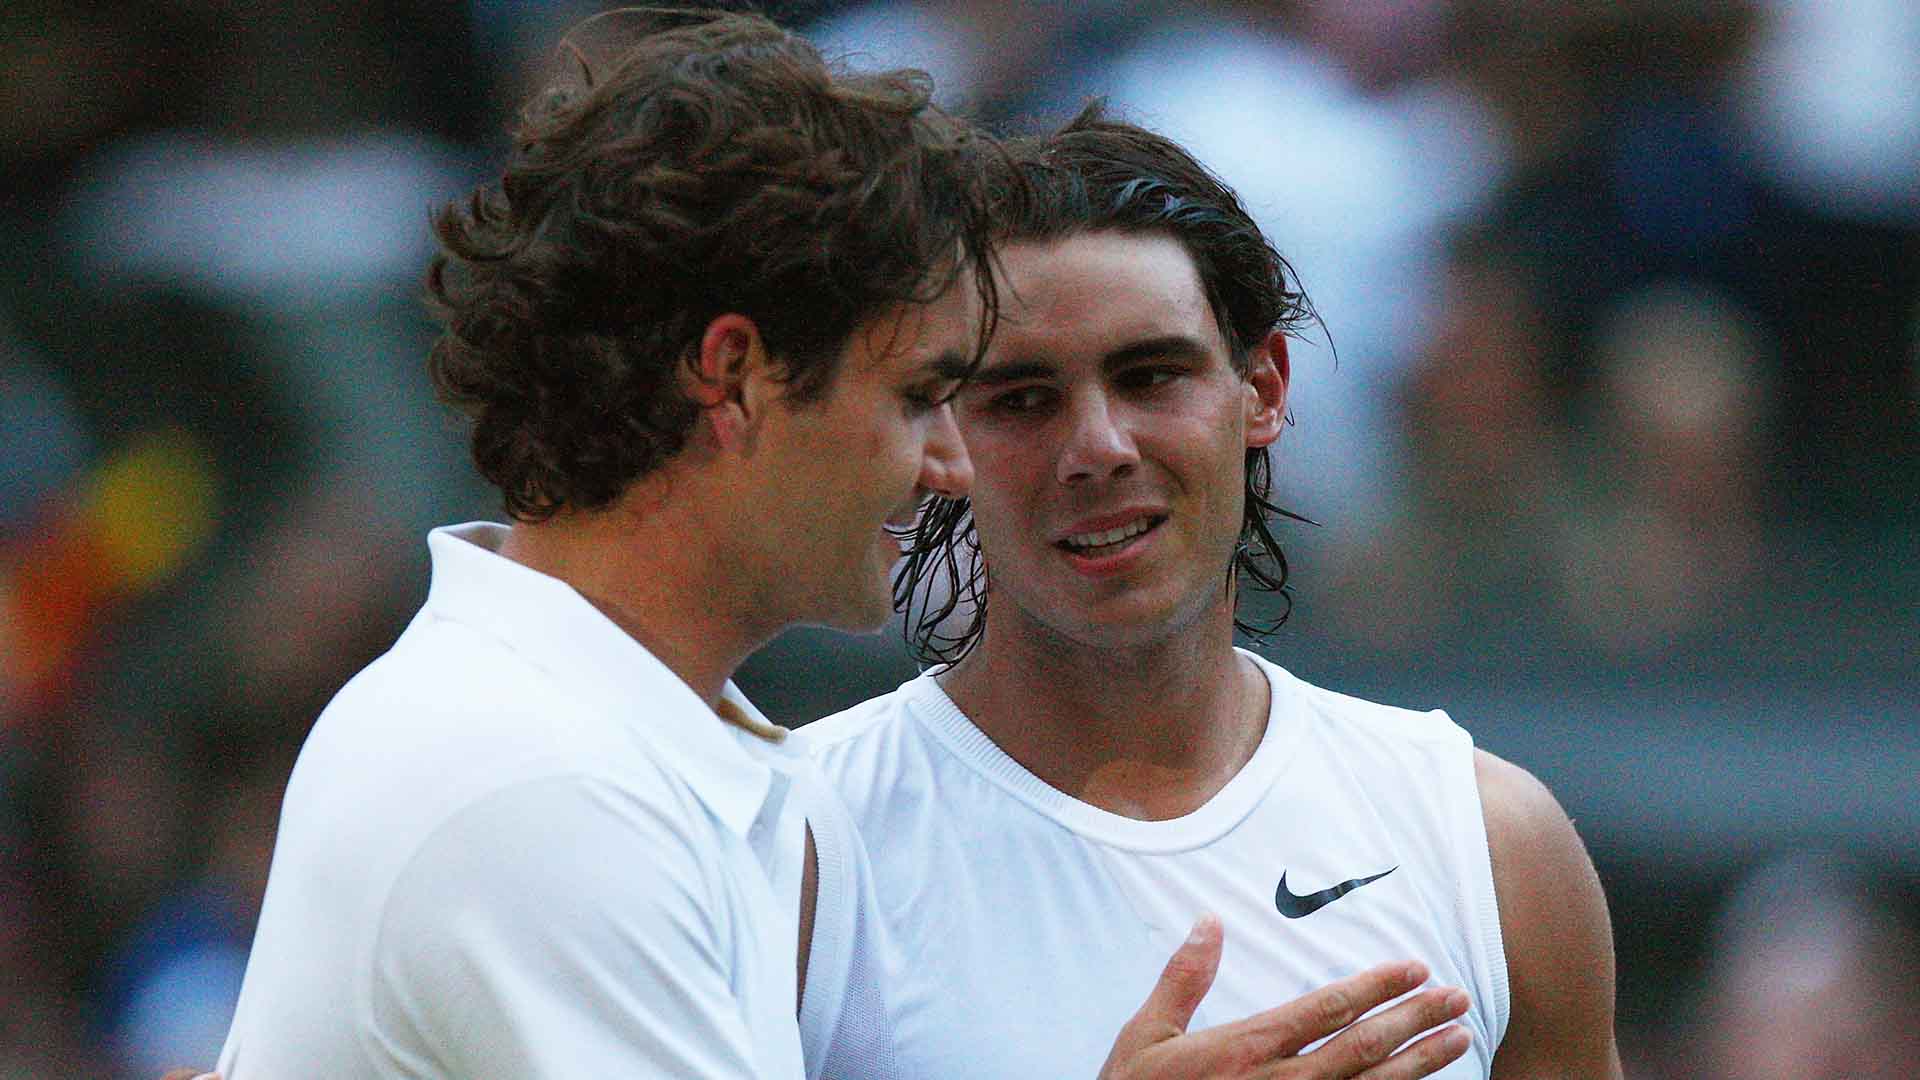 Roger Federer and Rafael Nadal share a moment at the net following the conclusion of the 2008 Wimbledon final.